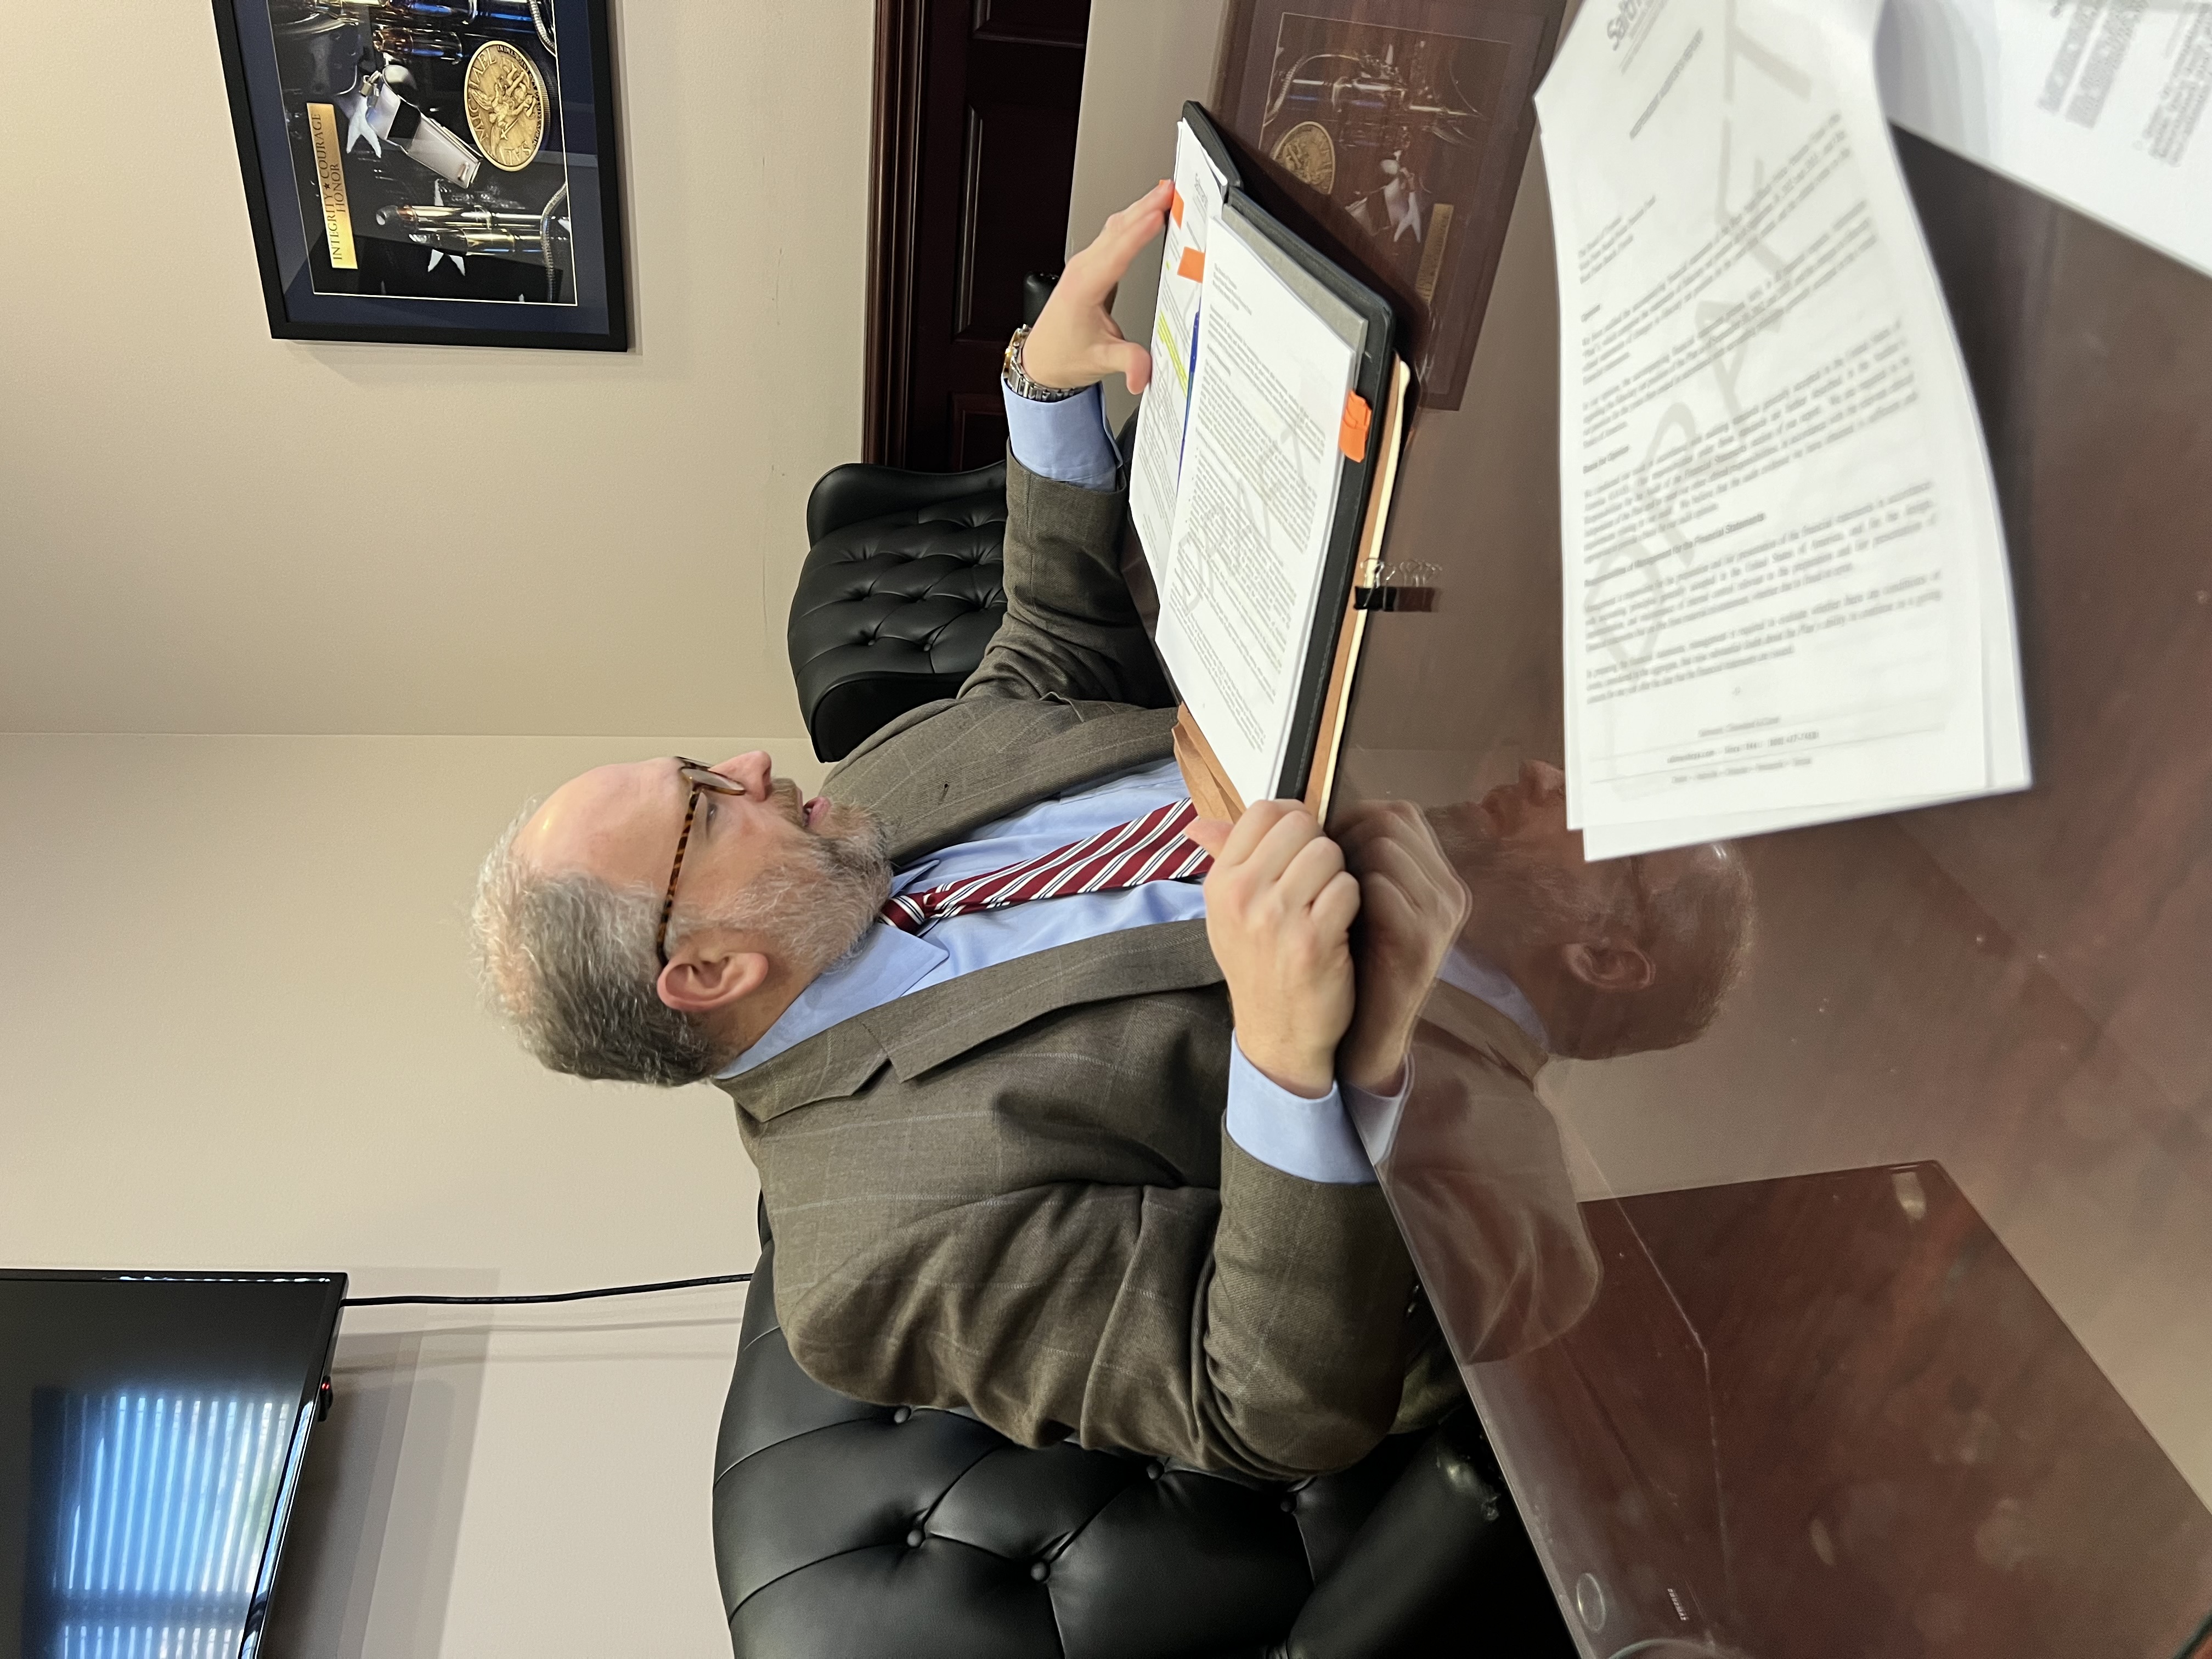 February 10th, 2023: The Board of Trustees received the independent audit report by Saltmarsh, Cleaveland & Gund. Pictured is Mr. Chuck Landers, CPA. The financial statements may be viewed on this website under the disclosure tab. 